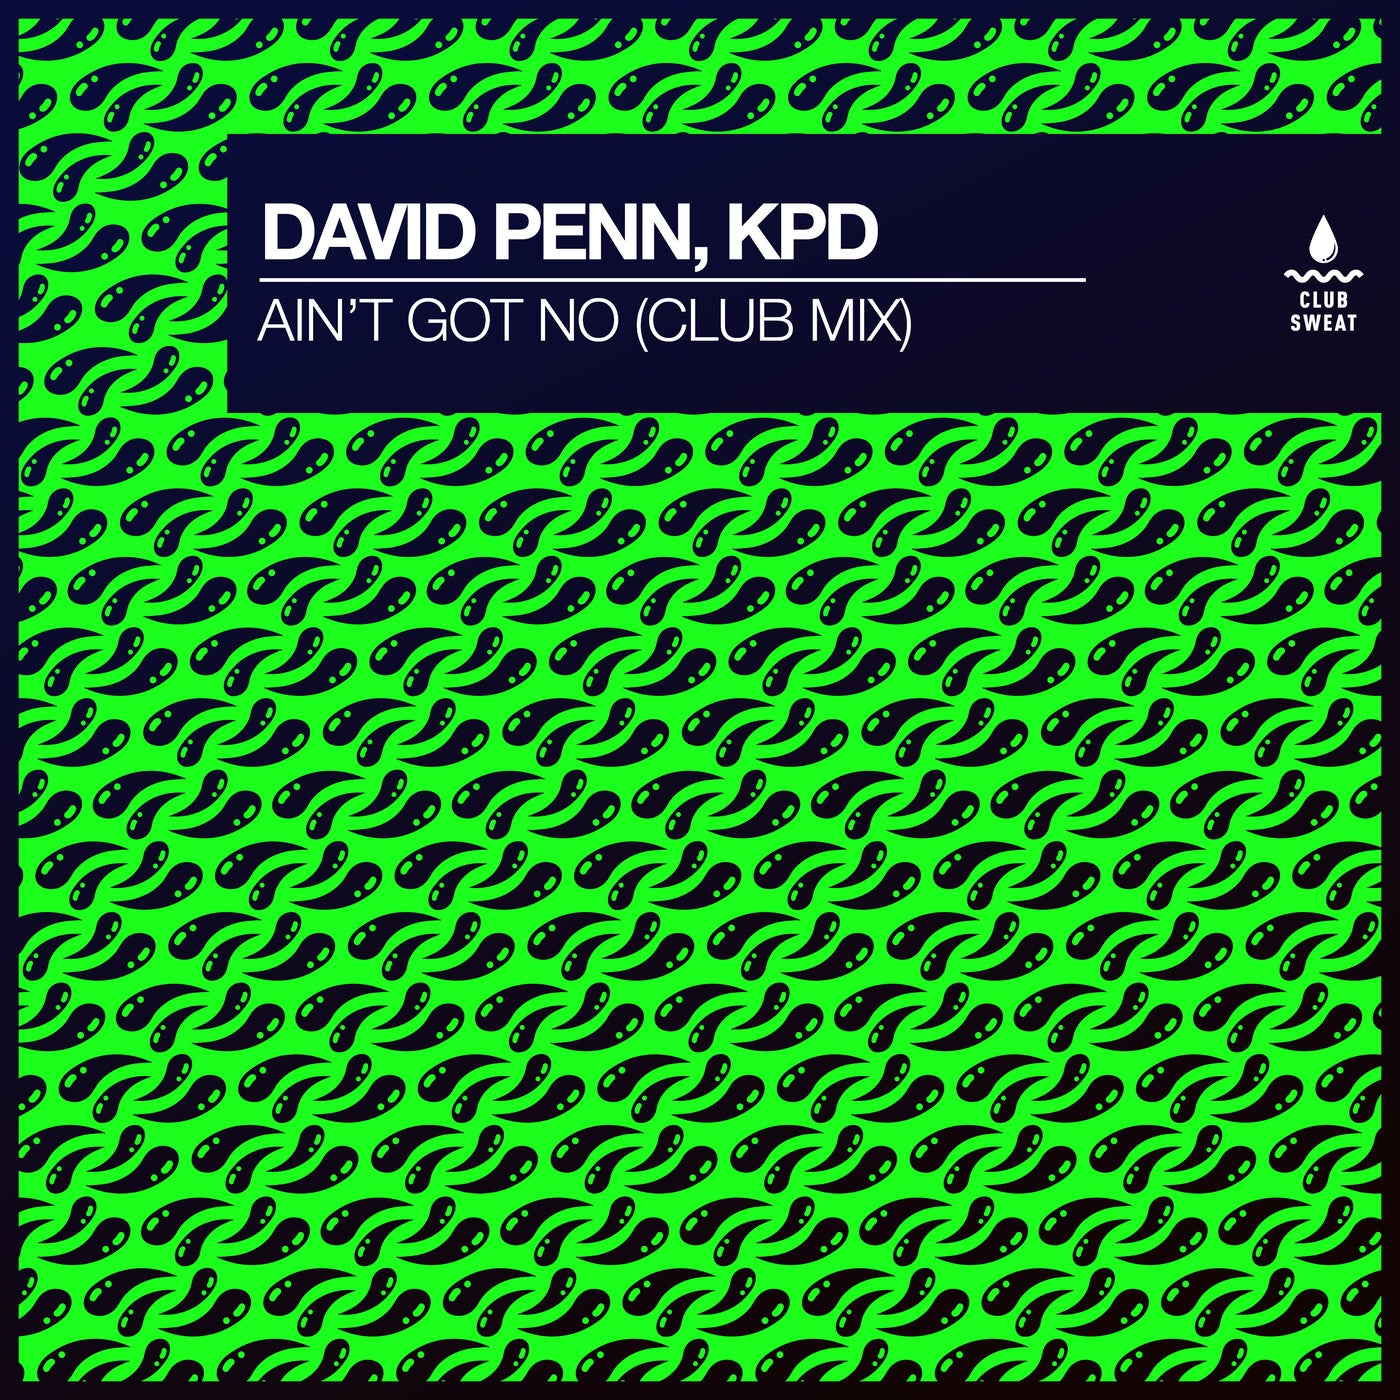 image cover: David Penn, KPD - Ain't Got No (Club Extended Mix) on Club Sweat